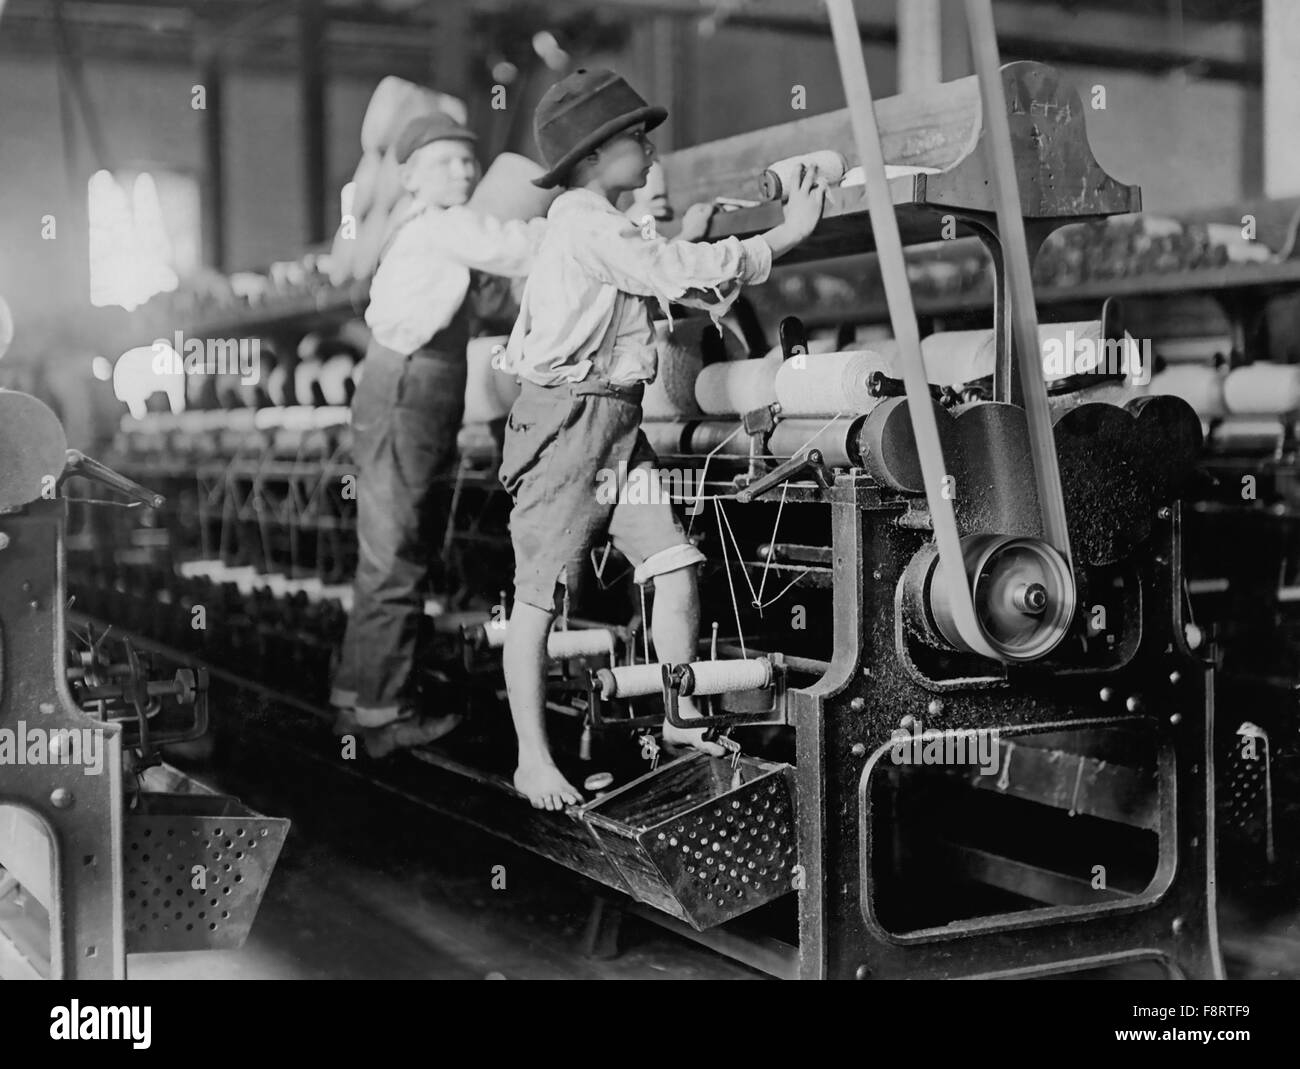 LEWIS HINE (1874-1940) American sociologist and photographer. Children working in a cotton mill in Macon, Georgia, in January 1909 Stock Photo